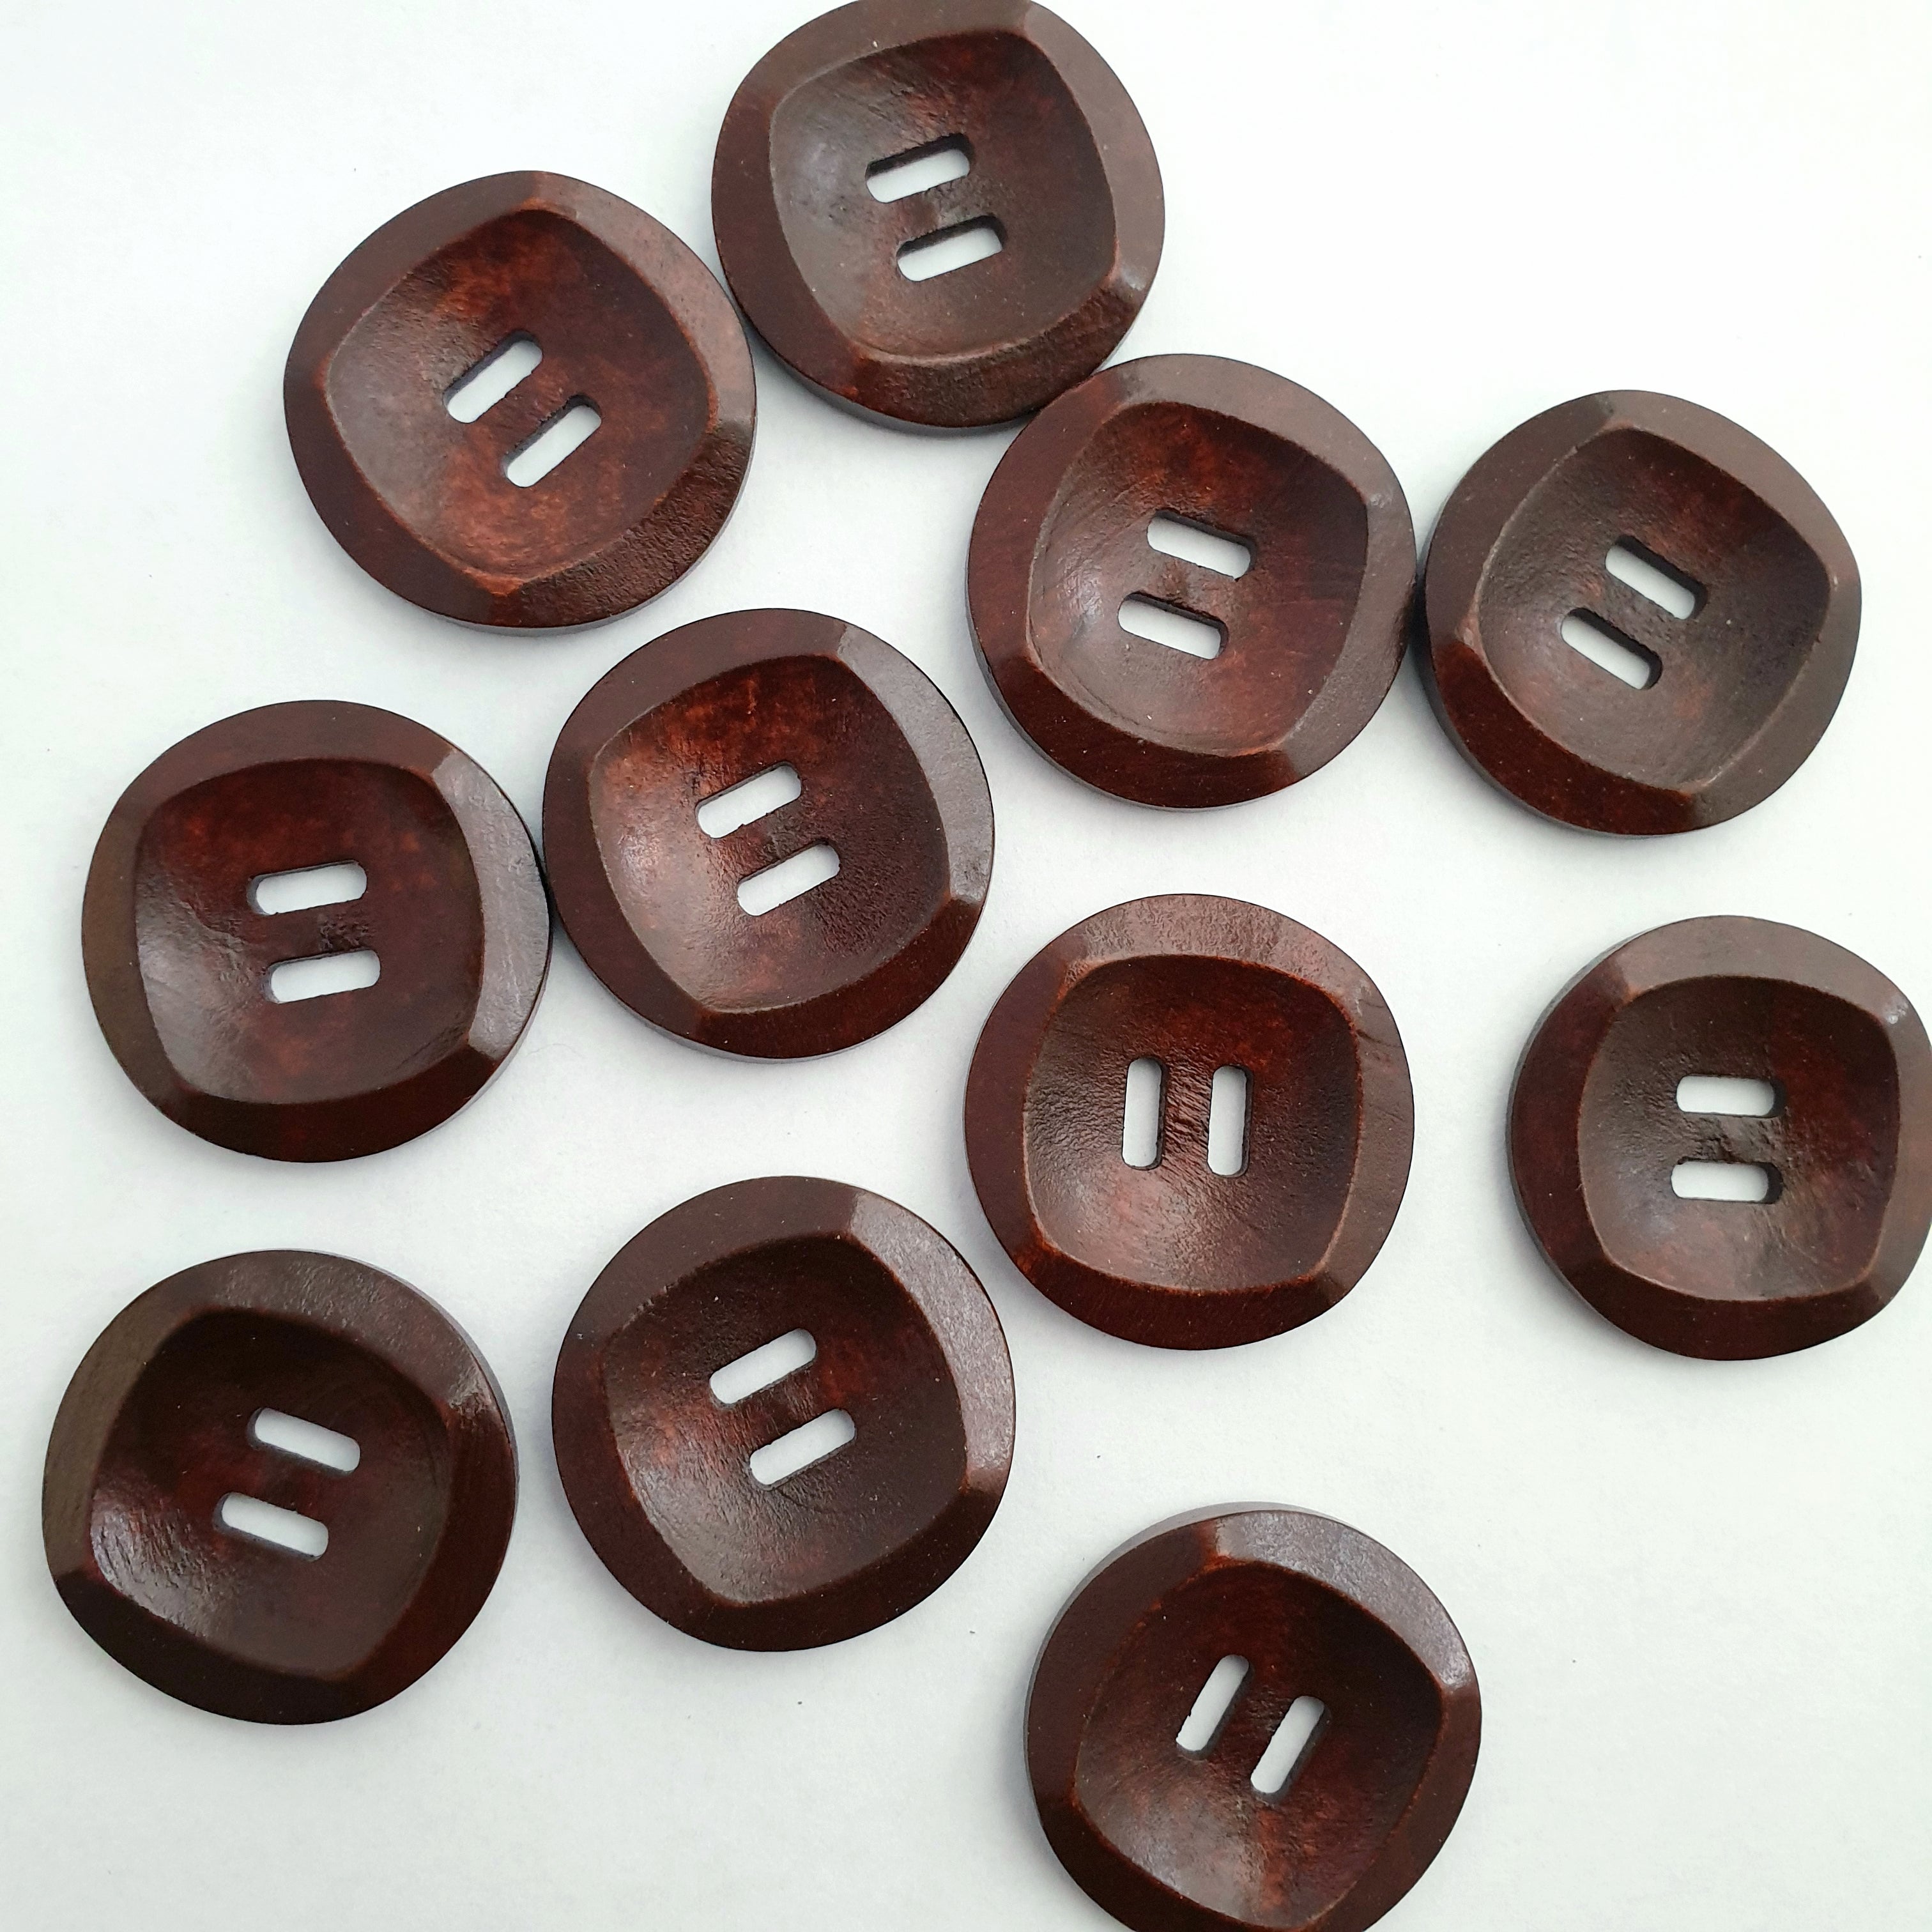 MajorCrafts 16pcs 30mm Dark Brown Square Top 2 Holes Large Sewing Wooden Buttons